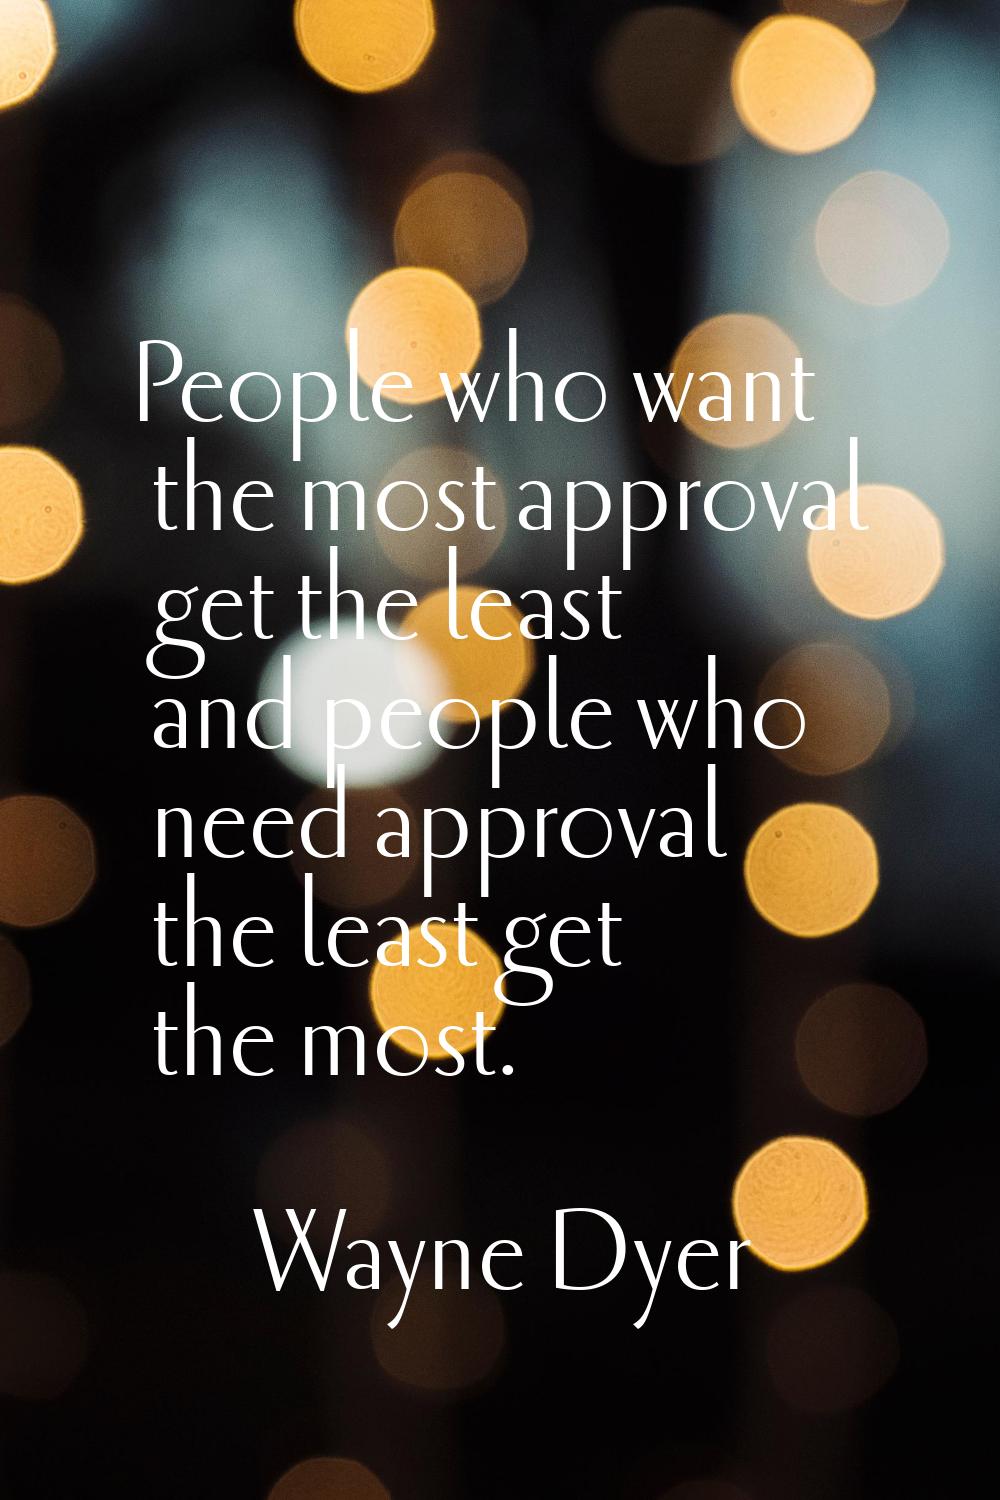 People who want the most approval get the least and people who need approval the least get the most